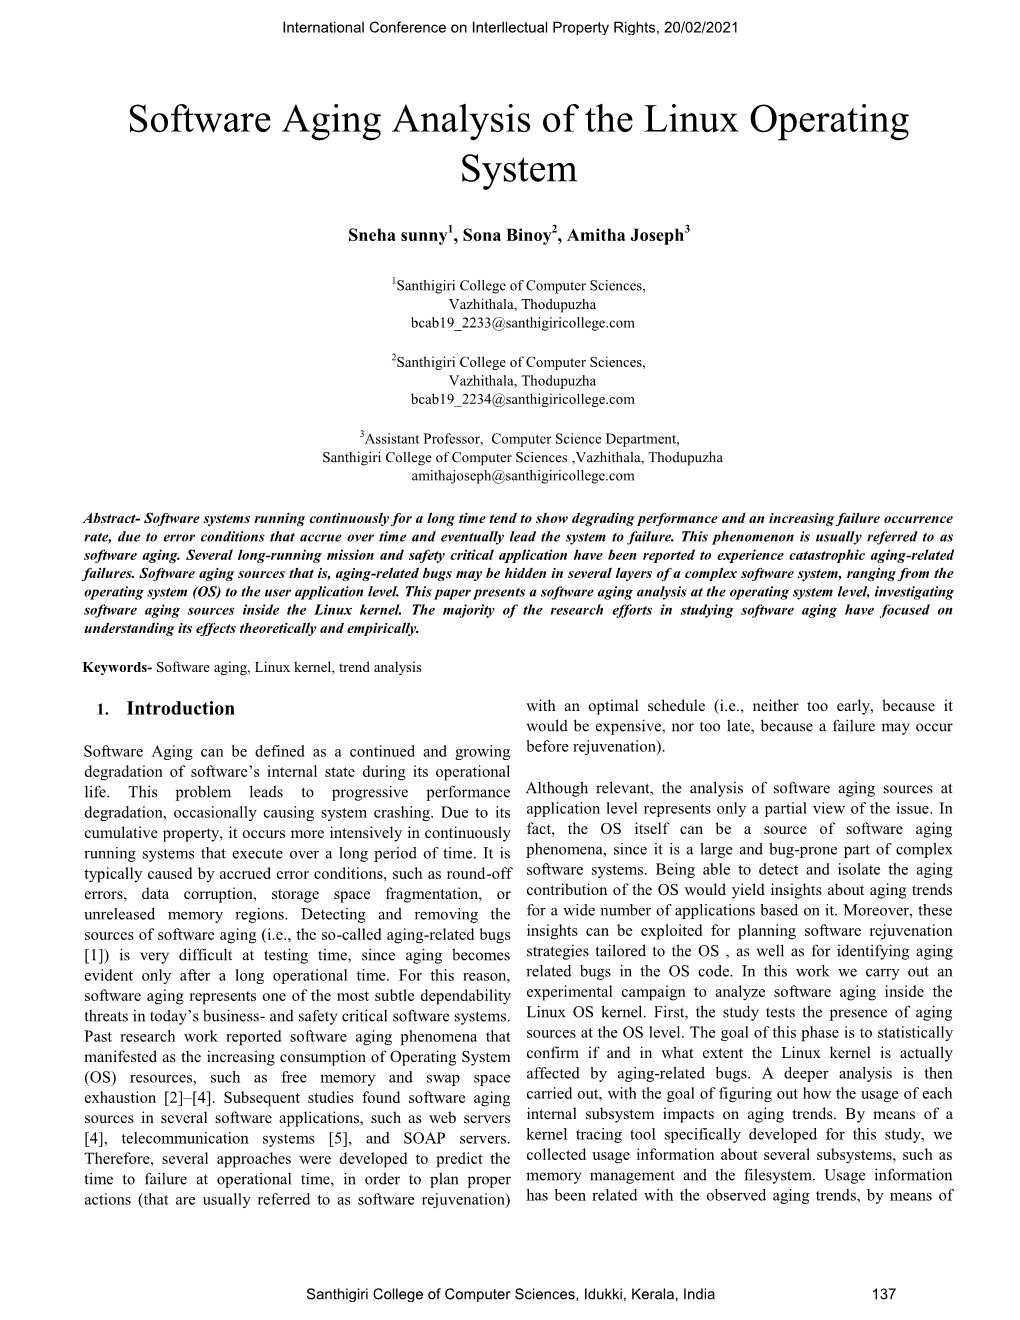 Software Aging Analysis of the Linux Operating System